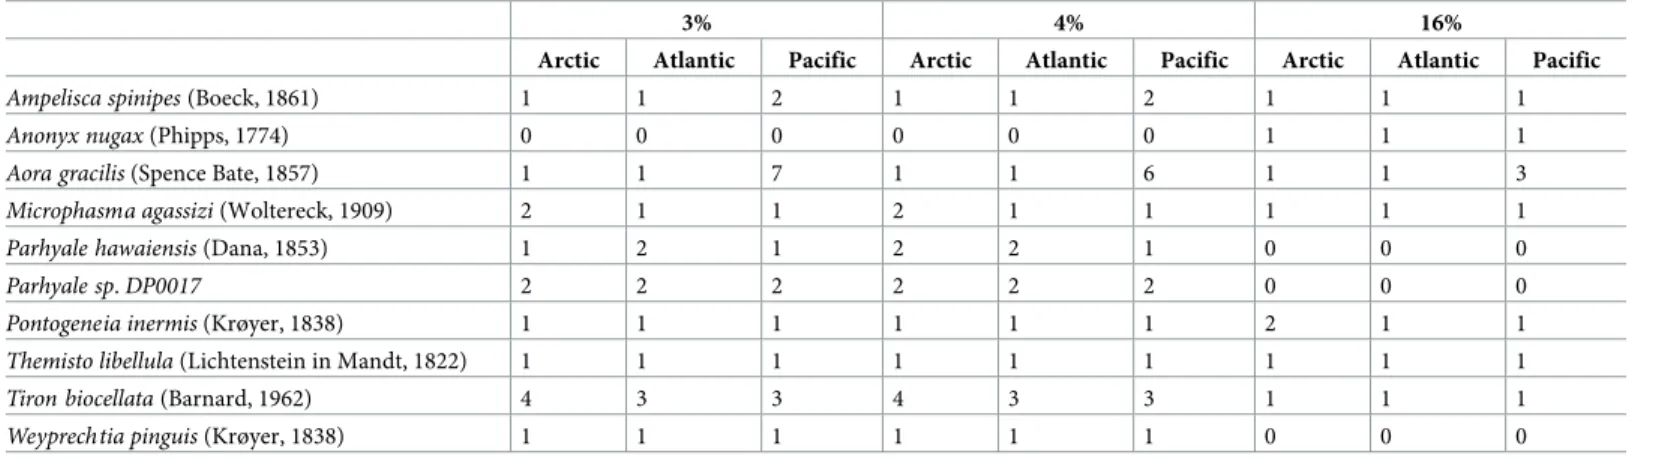 Table 2. Species found in the three oceans.